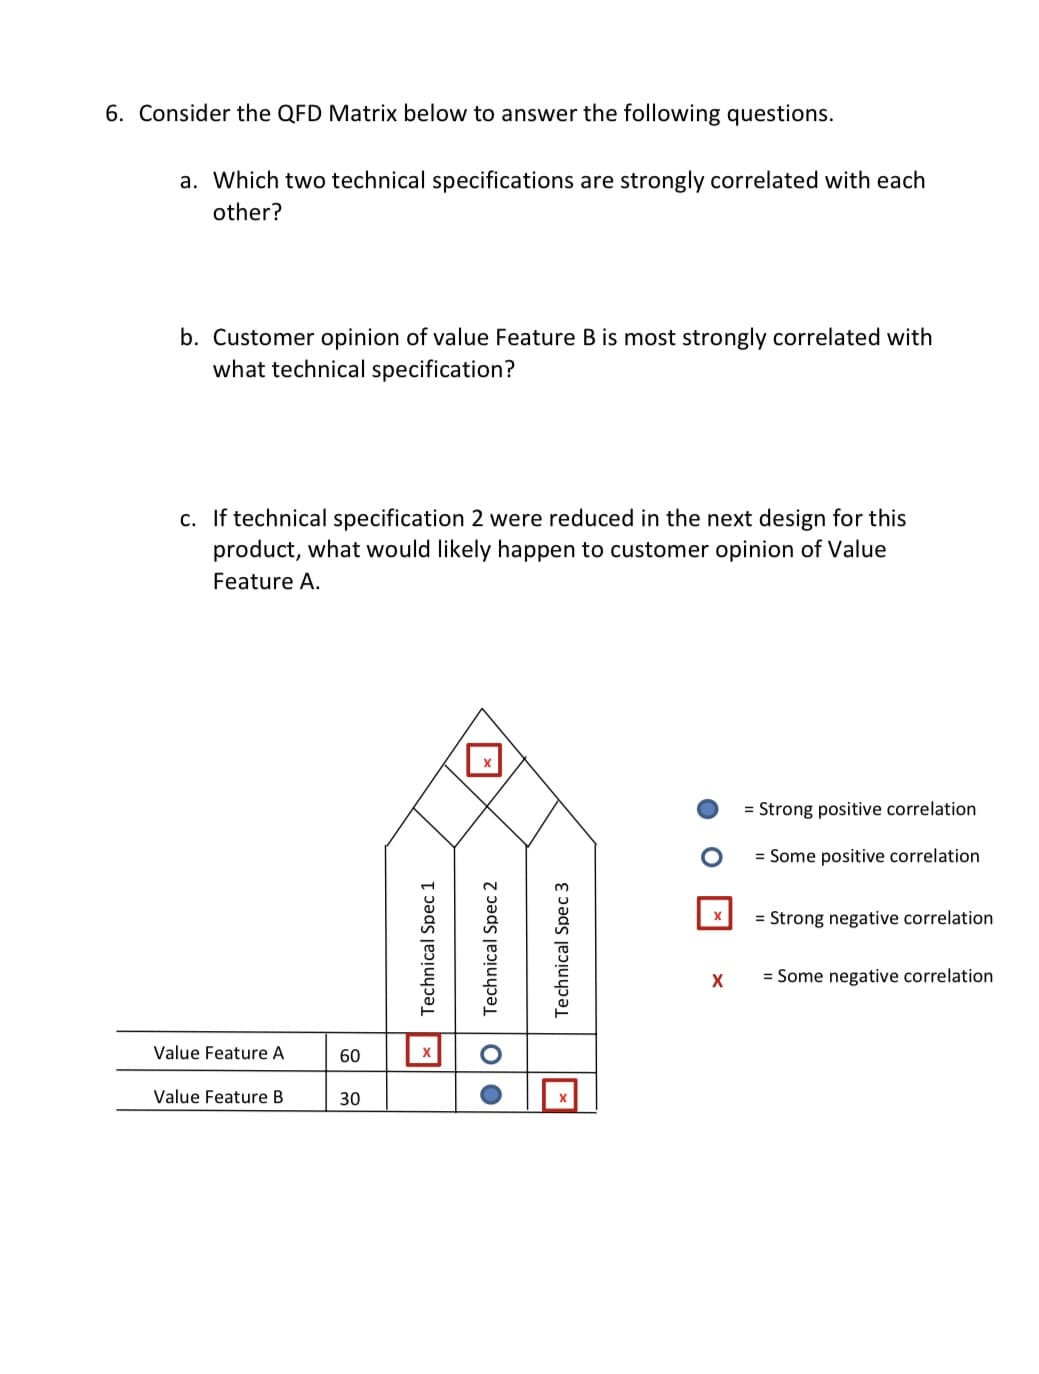 6. Consider the QFD Matrix below to answer the following questions.
a. Which two technical specifications are strongly correlated with each
other?
b. Customer opinion of value Feature B is most strongly correlated with
what technical specification?
c. If technical specification 2 were reduced in the next design for this
product, what would likely happen to customer opinion of Value
Feature A.
= Strong positive correlation
= Some positive correlation
= Strong negative correlation
= Some negative correlation
Value Feature A
60
Value Feature B
30
x Technical Spec 1
●1O Technical Spec 2
Technical Spec 3
